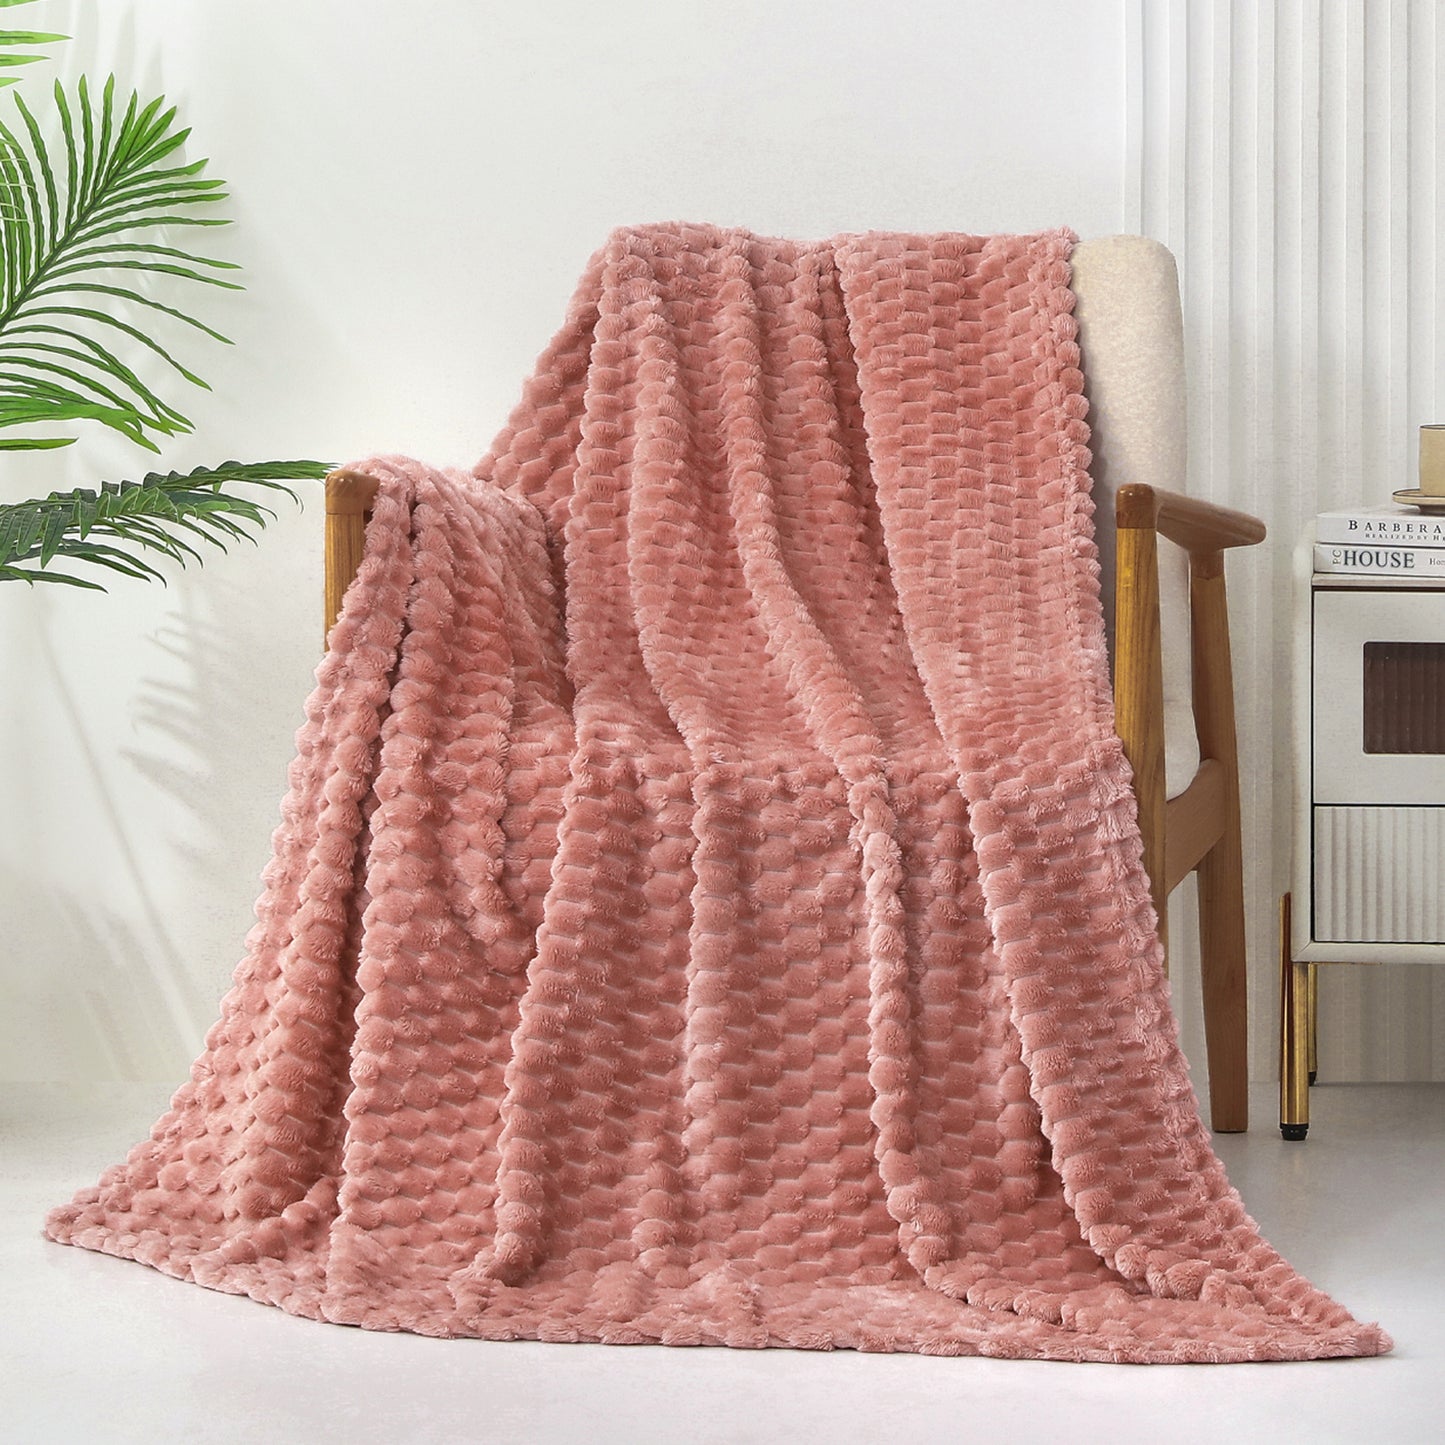 Exclusivo Mezcla Large Soft Fleece Throw Blanket, 50x70 Inches Stylish Jacquard Throw Blanket for Couch, Cozy, Warm, Lightweight and Decorative Dusty Pink Blanket